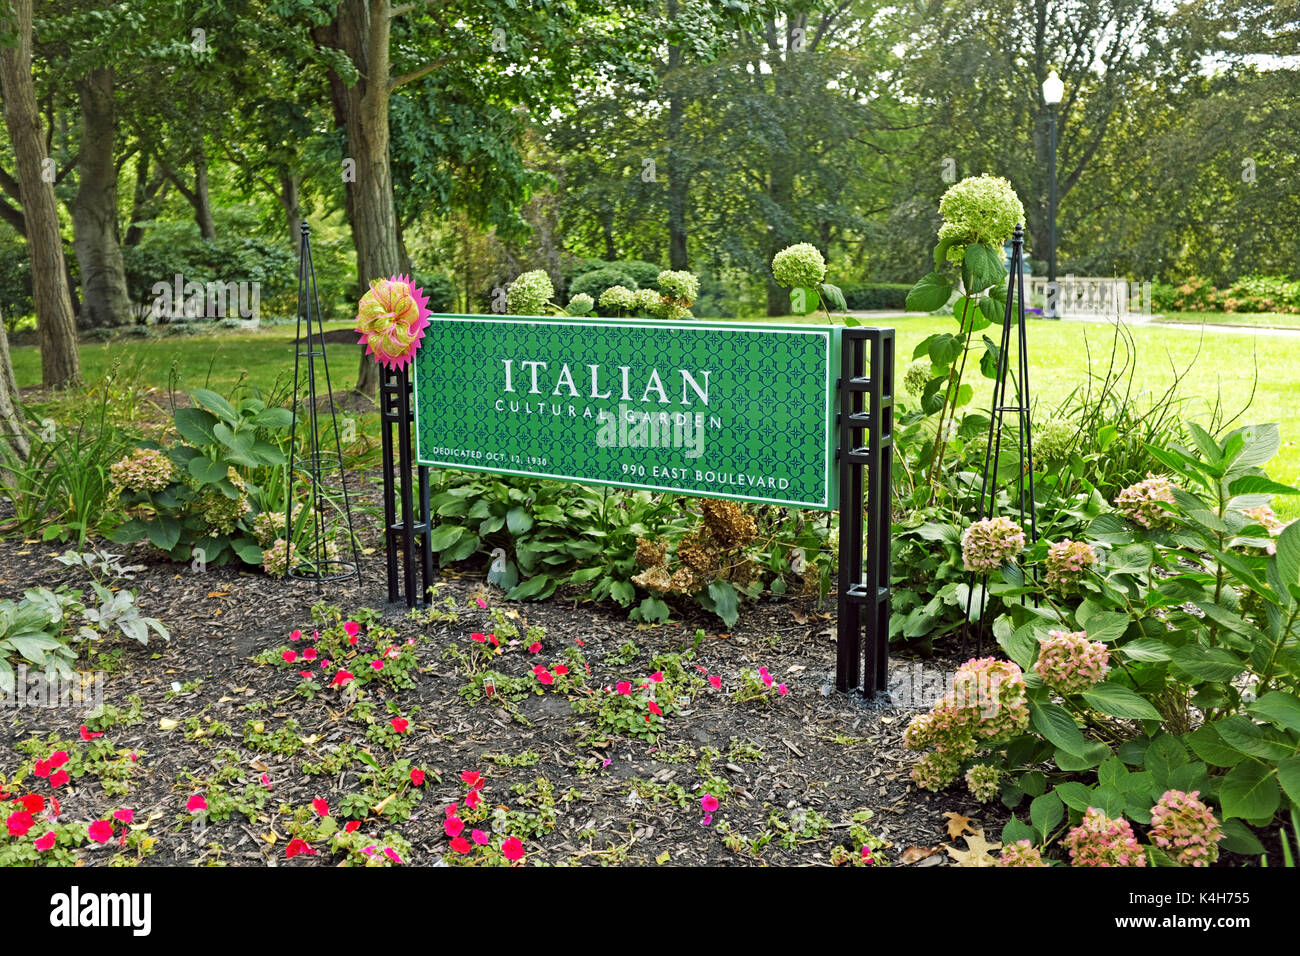 The Italian Cultural Gardens in Cleveland, Ohio, USA were Dedicated in 1930 as a symbol of the contribution of Italian culture to American democracy. Stock Photo